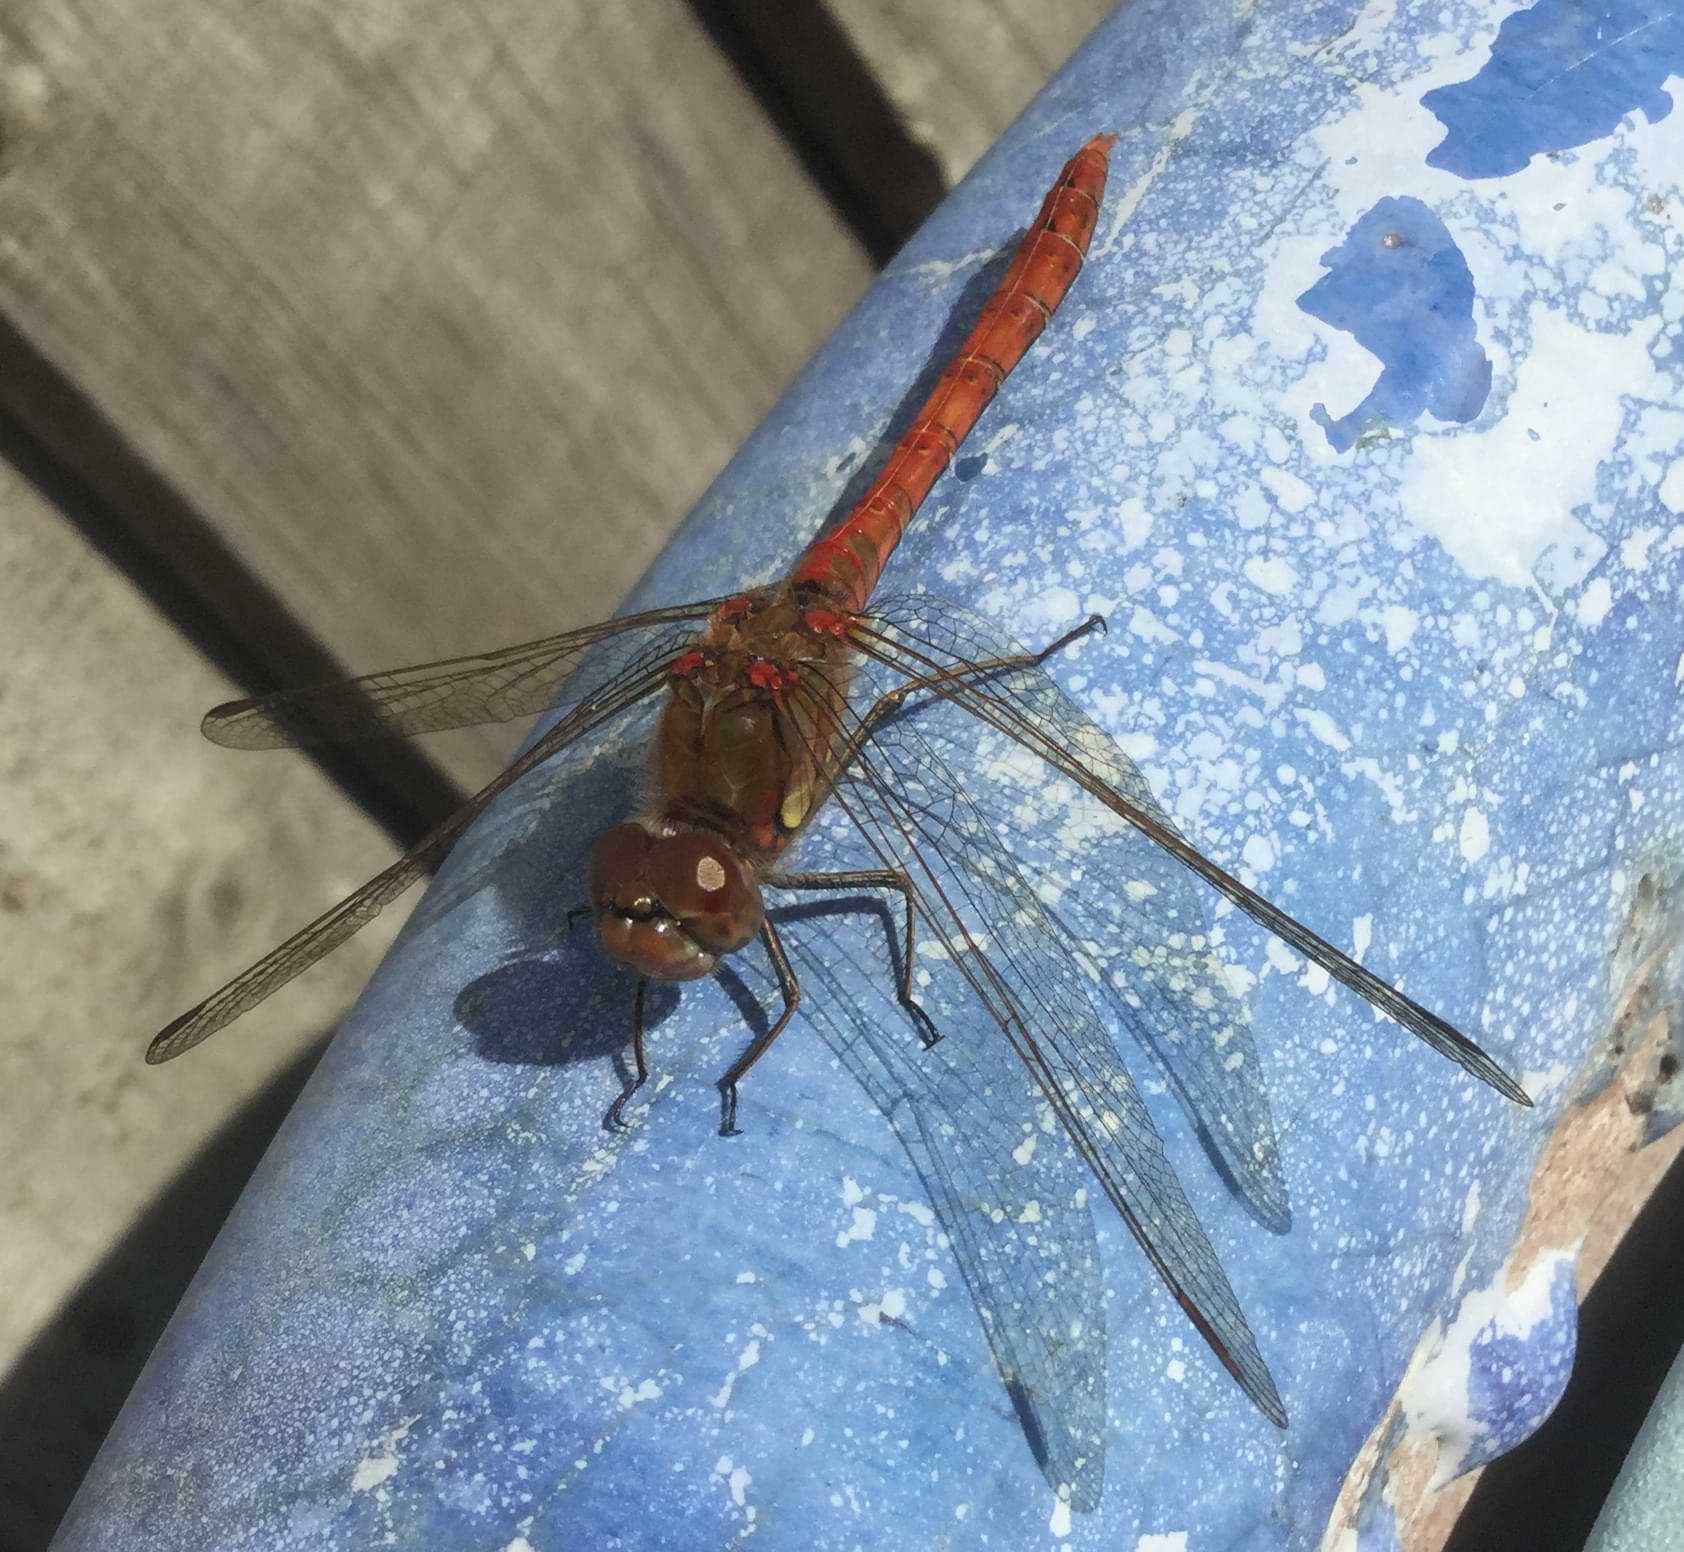 Photo of another dragonfly sitting on the bowl from the first picture. This dragonfly is redder in colour and has darker and blacker colouration on the legs. There is a little patch of yellow running up the side of its thorax.